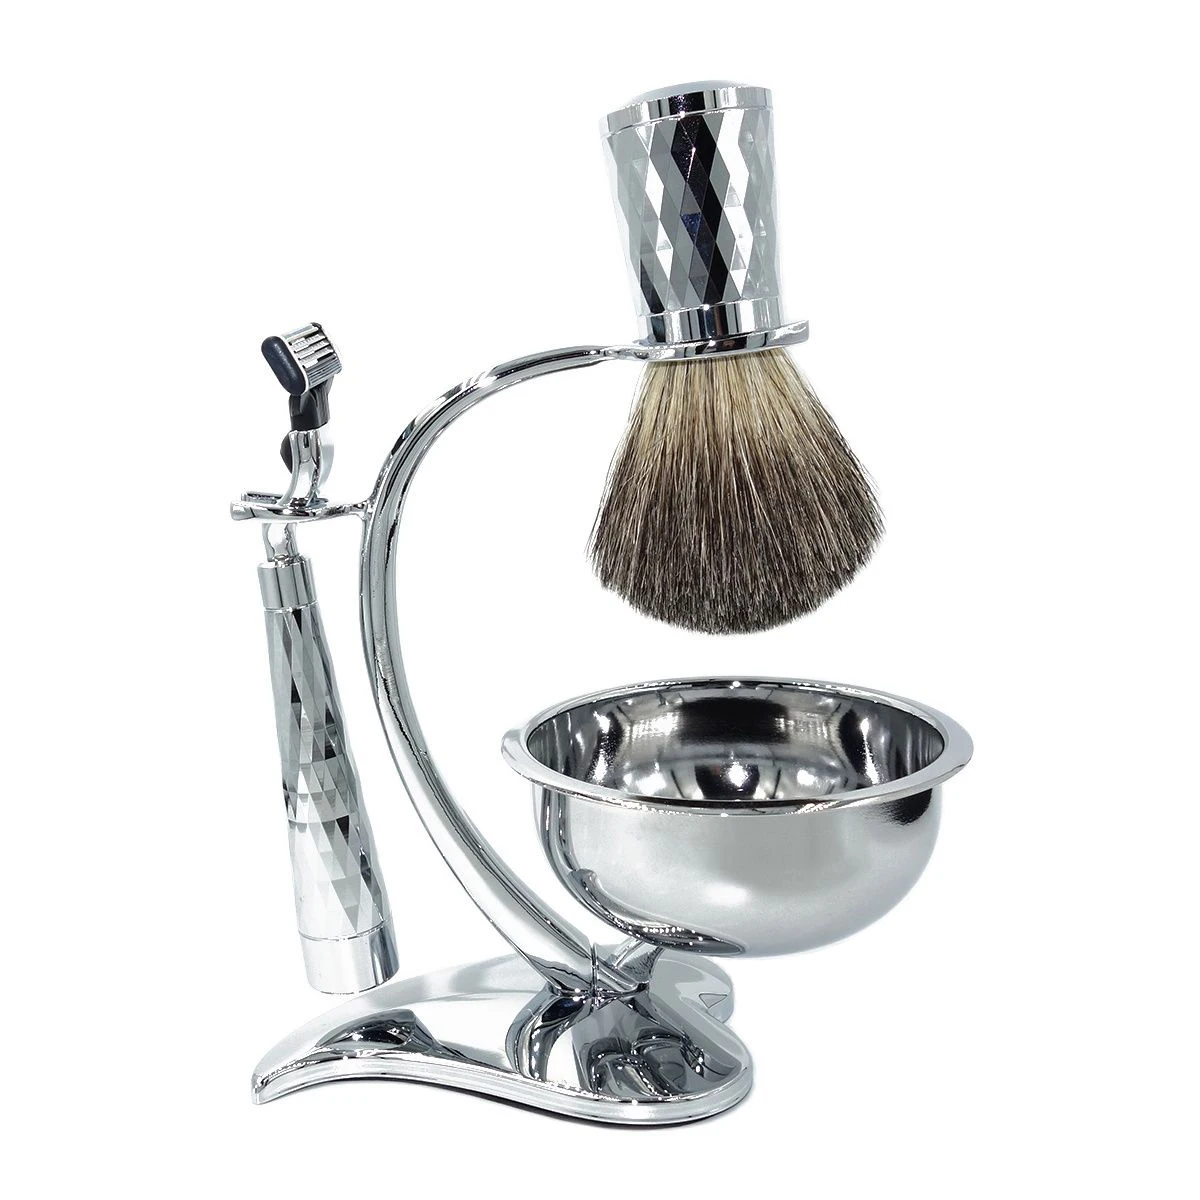 irazor-professional-4-in-1-shaving-set-with-mach-3-razor-and-beard-cleaning-badger-hair-brush-bowl-stand-holder-for-husband